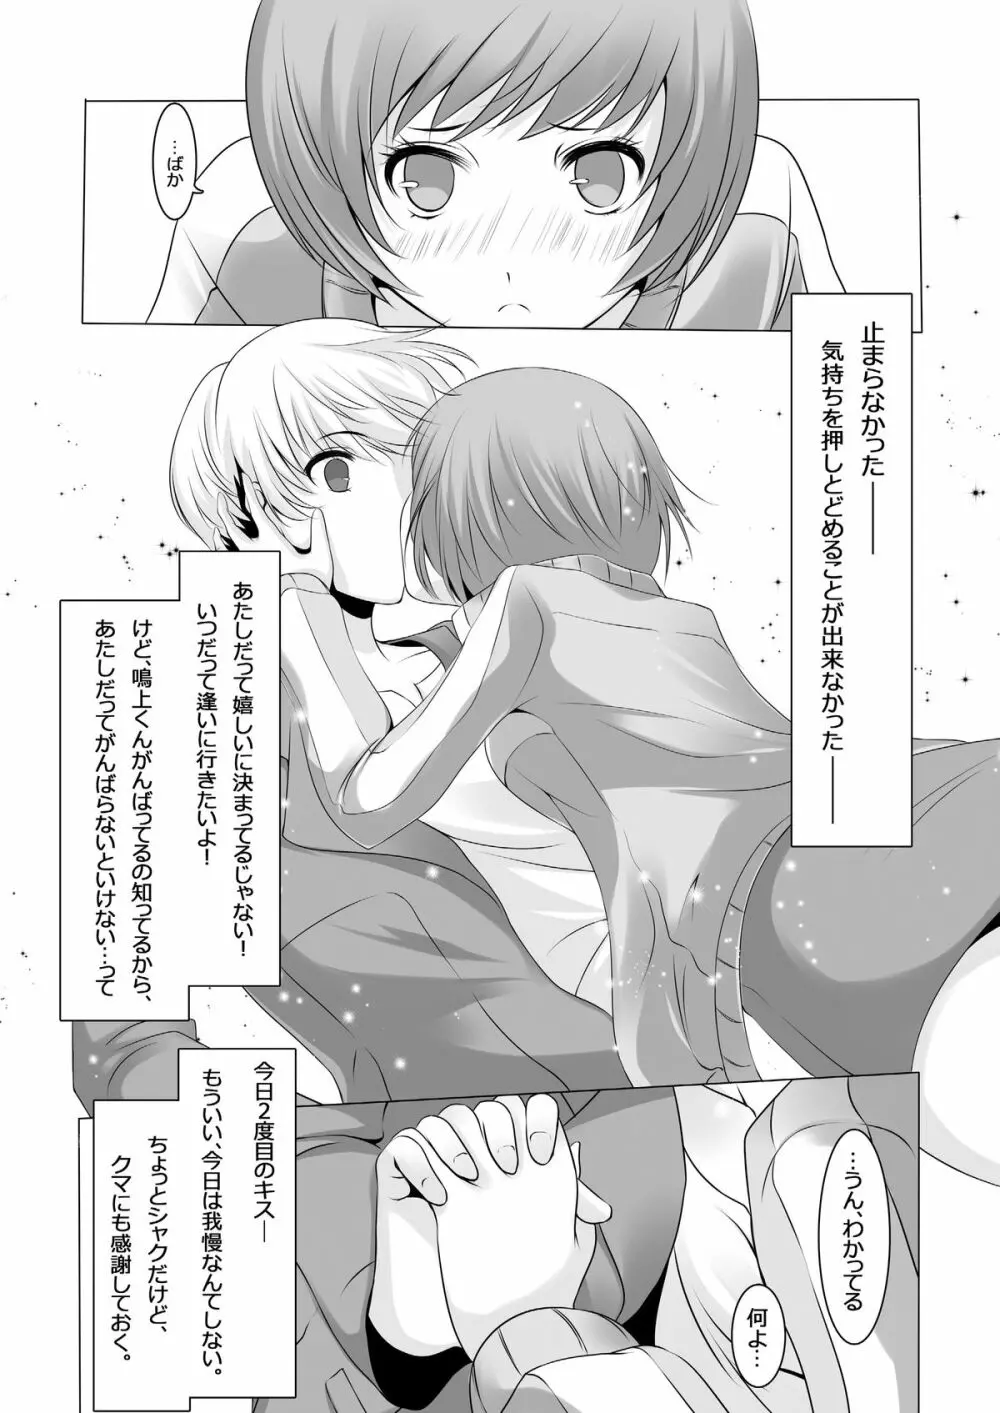 Persona 4: The Doujin #2 - page18